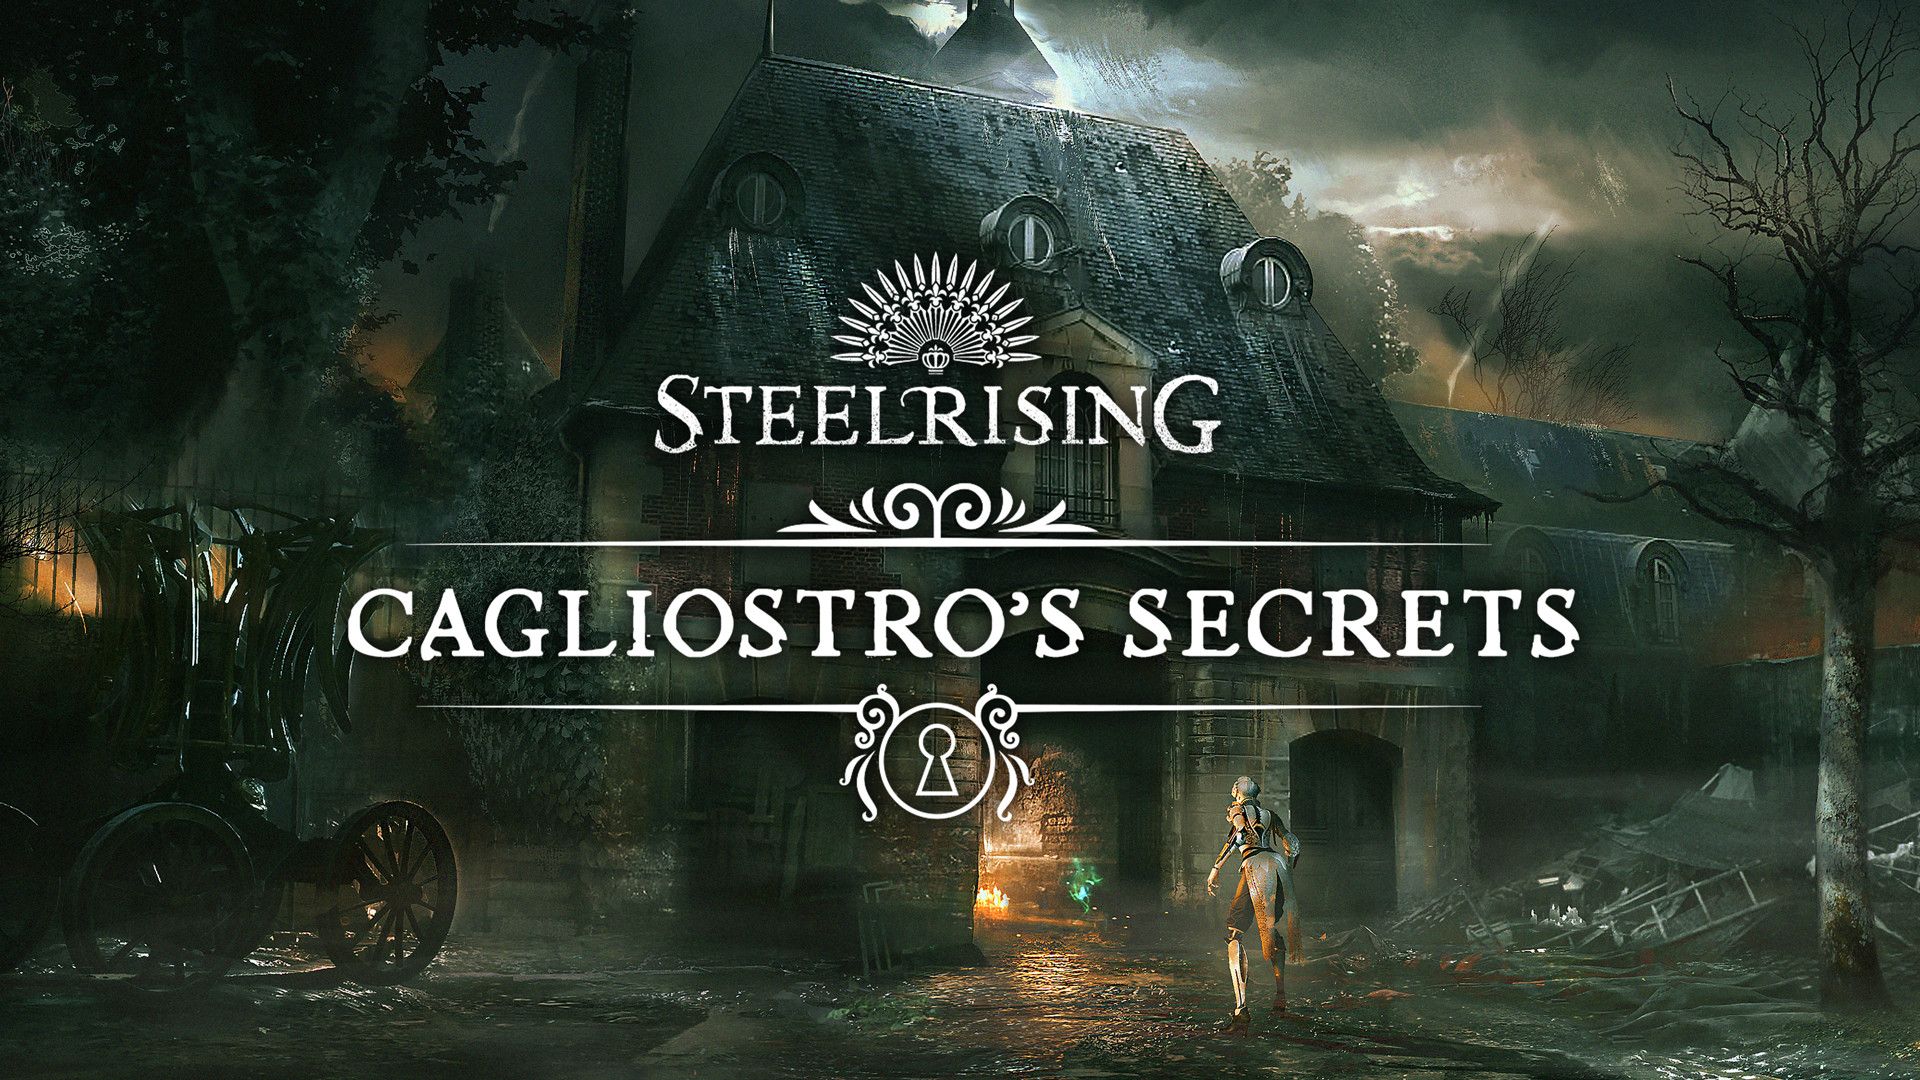 Steelrising: Cagliostro’s Secrets is Out Now